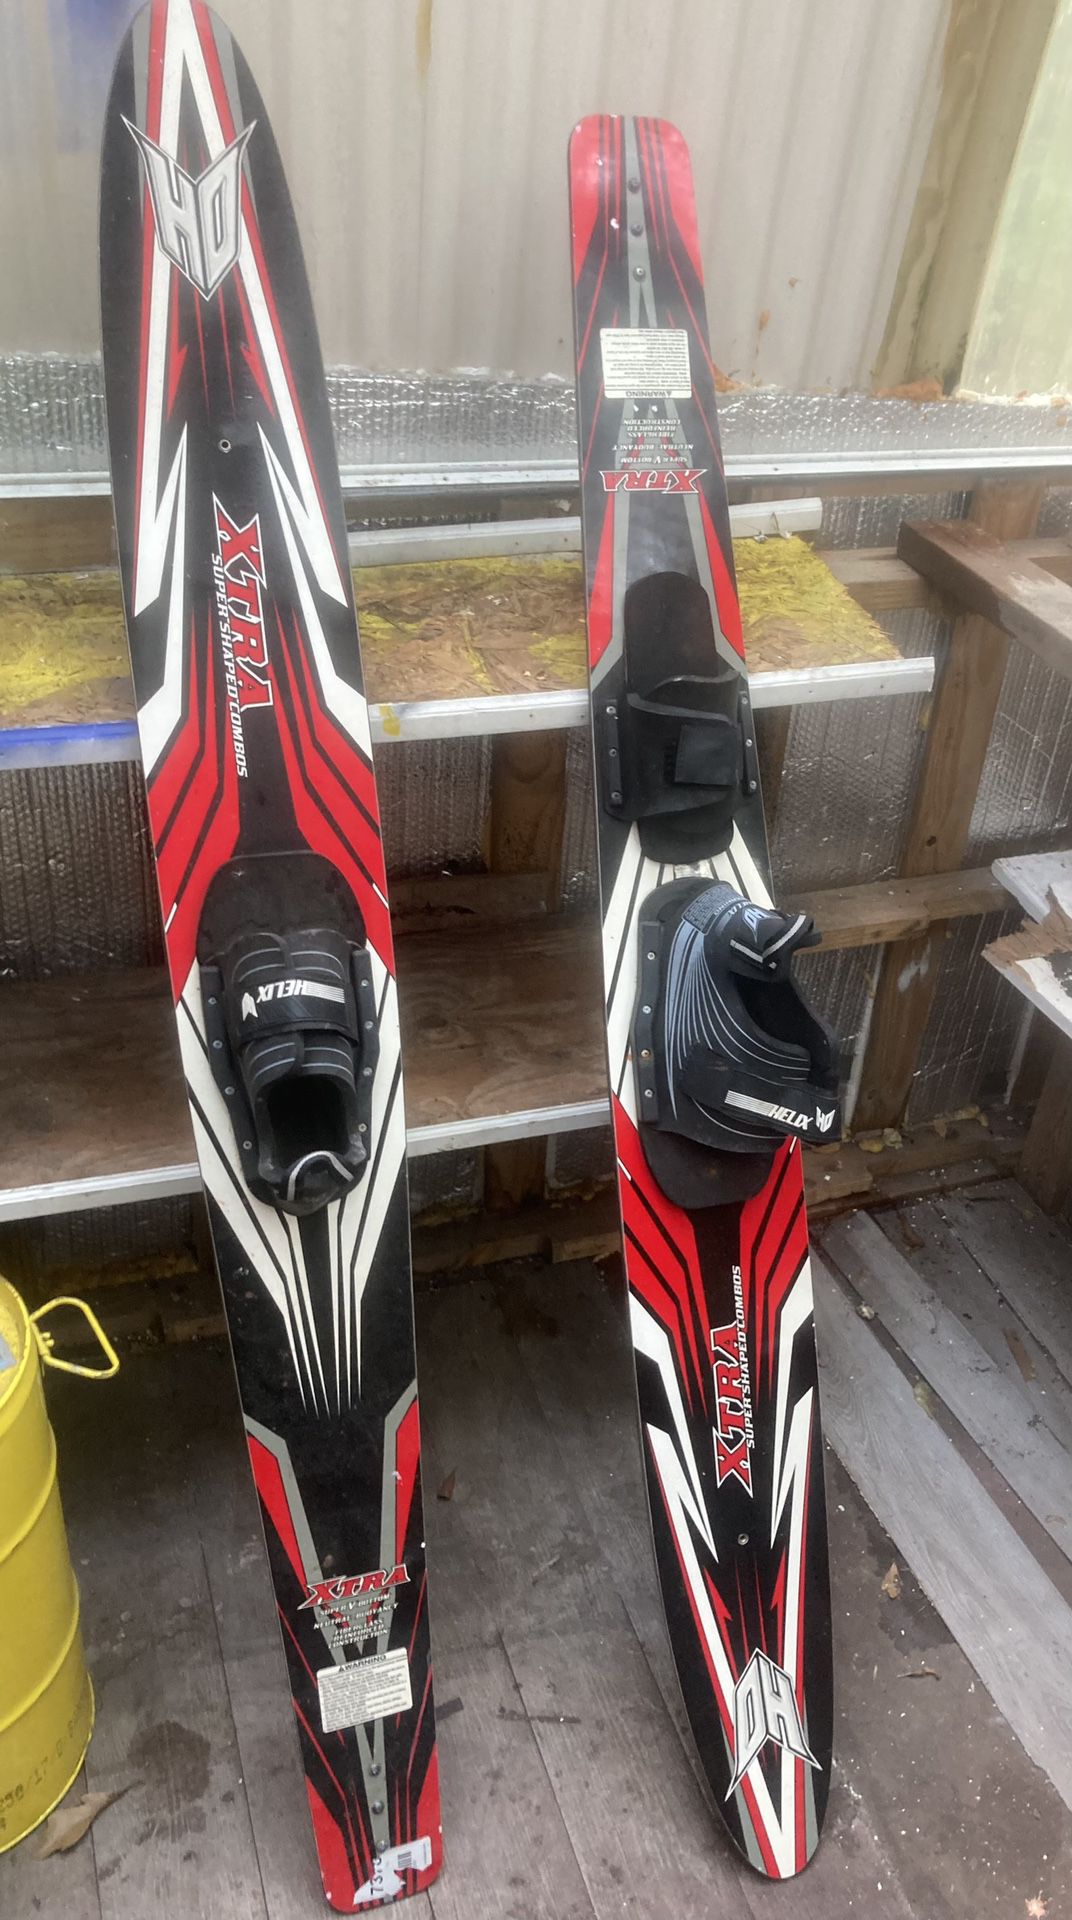 New Water Skis